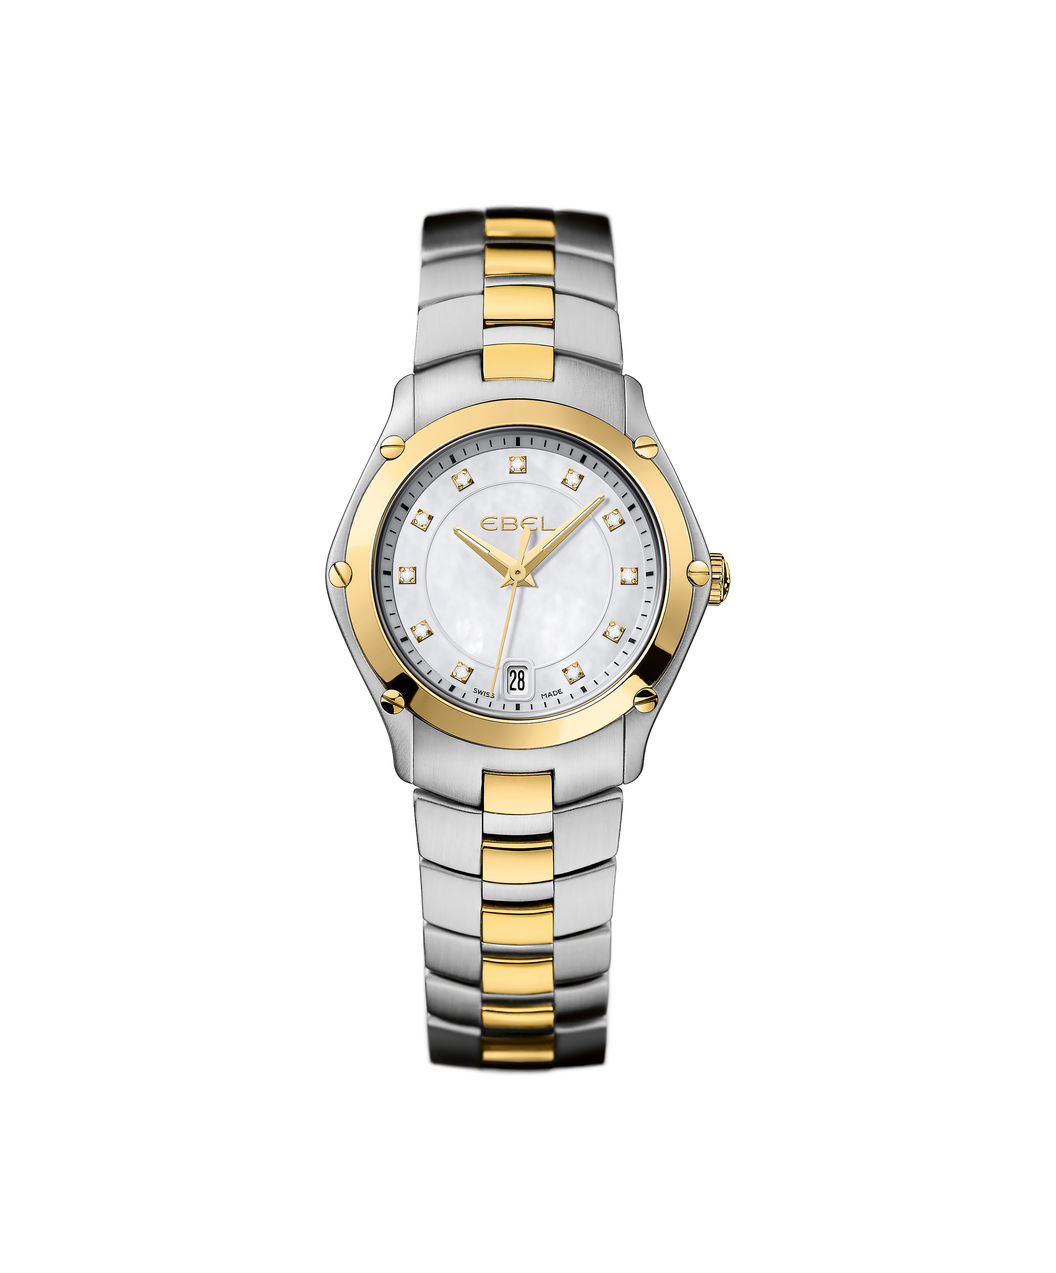 Top Luxury Watches | Movado, Ebel, Tag Heuer | It Must Be Time